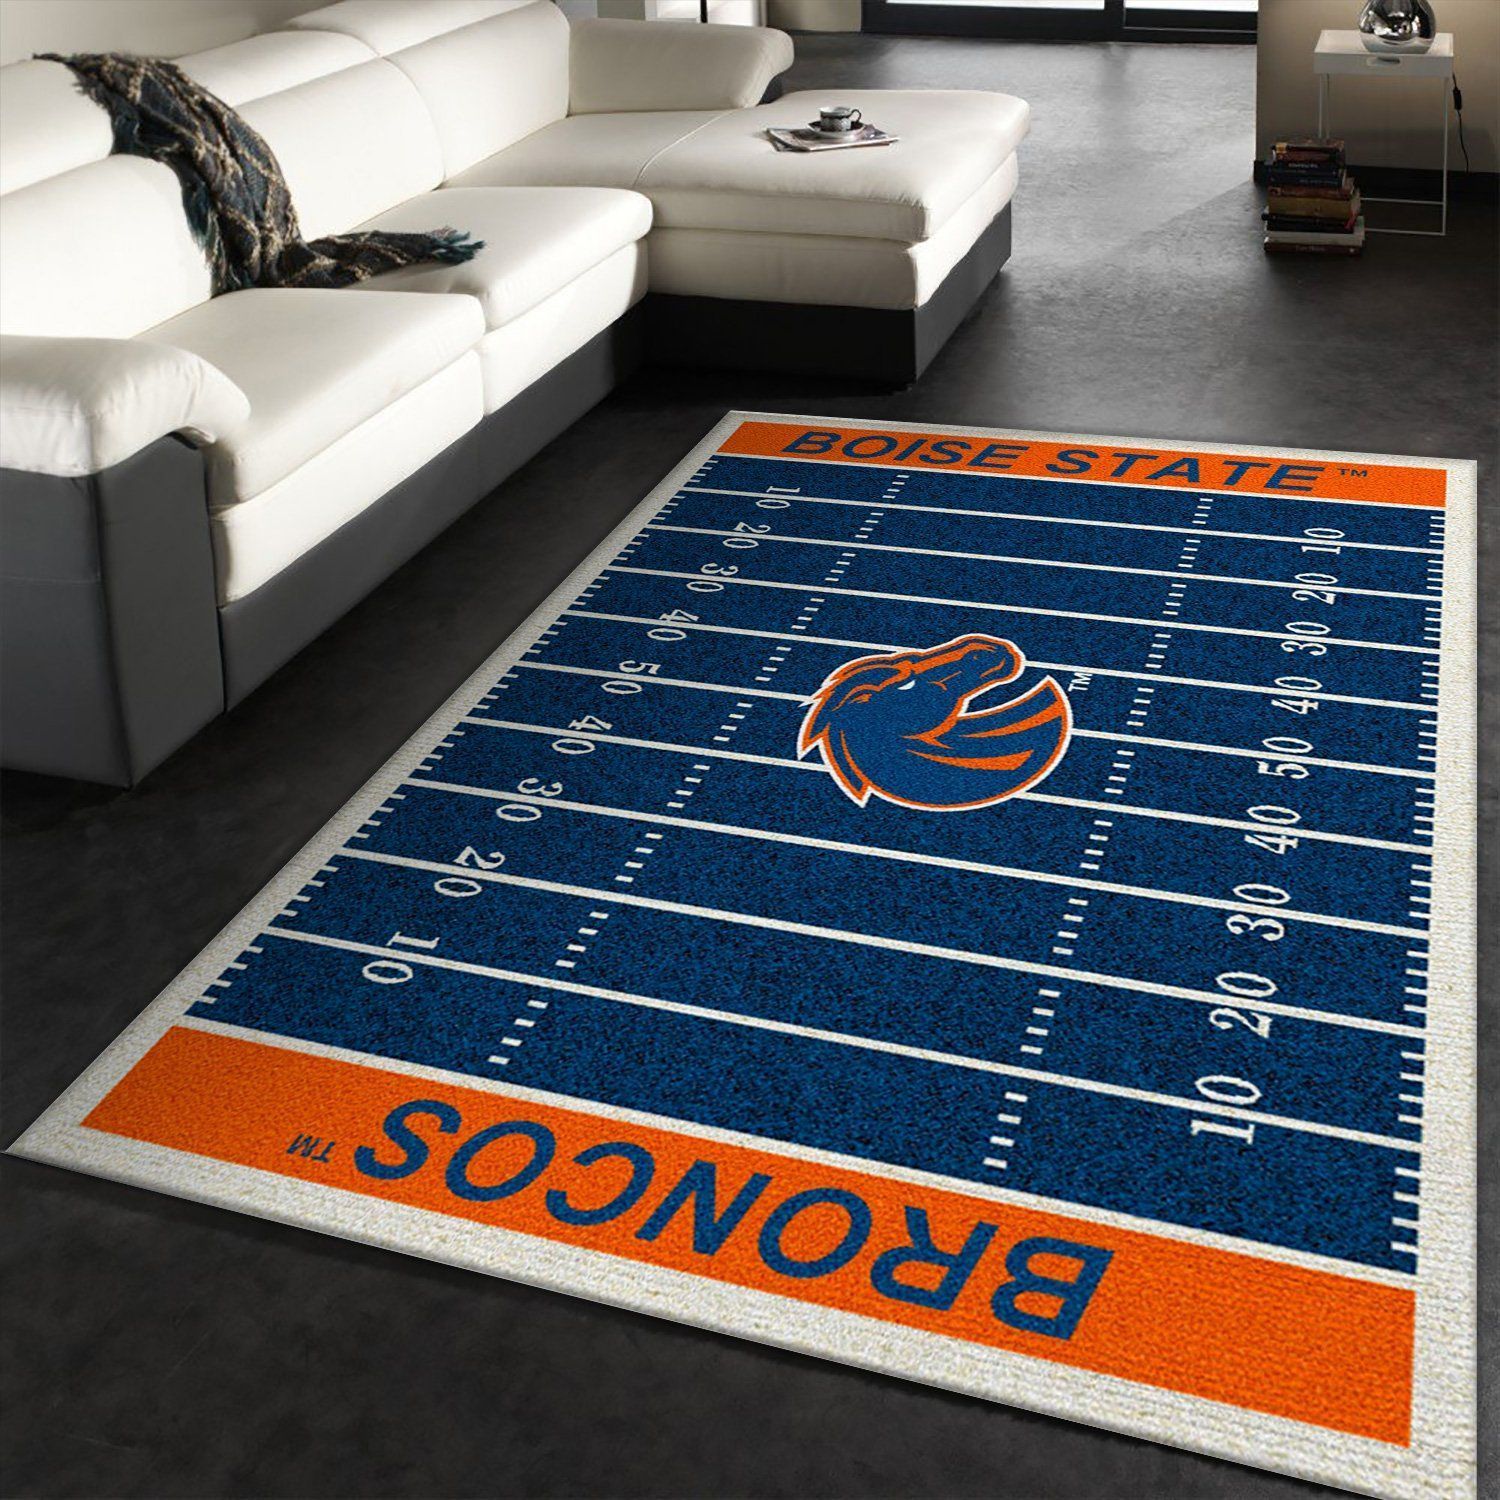 Rugs in Living Room and Bedroom - College boise state nfl team logo area rug kitchen rug us gift decor